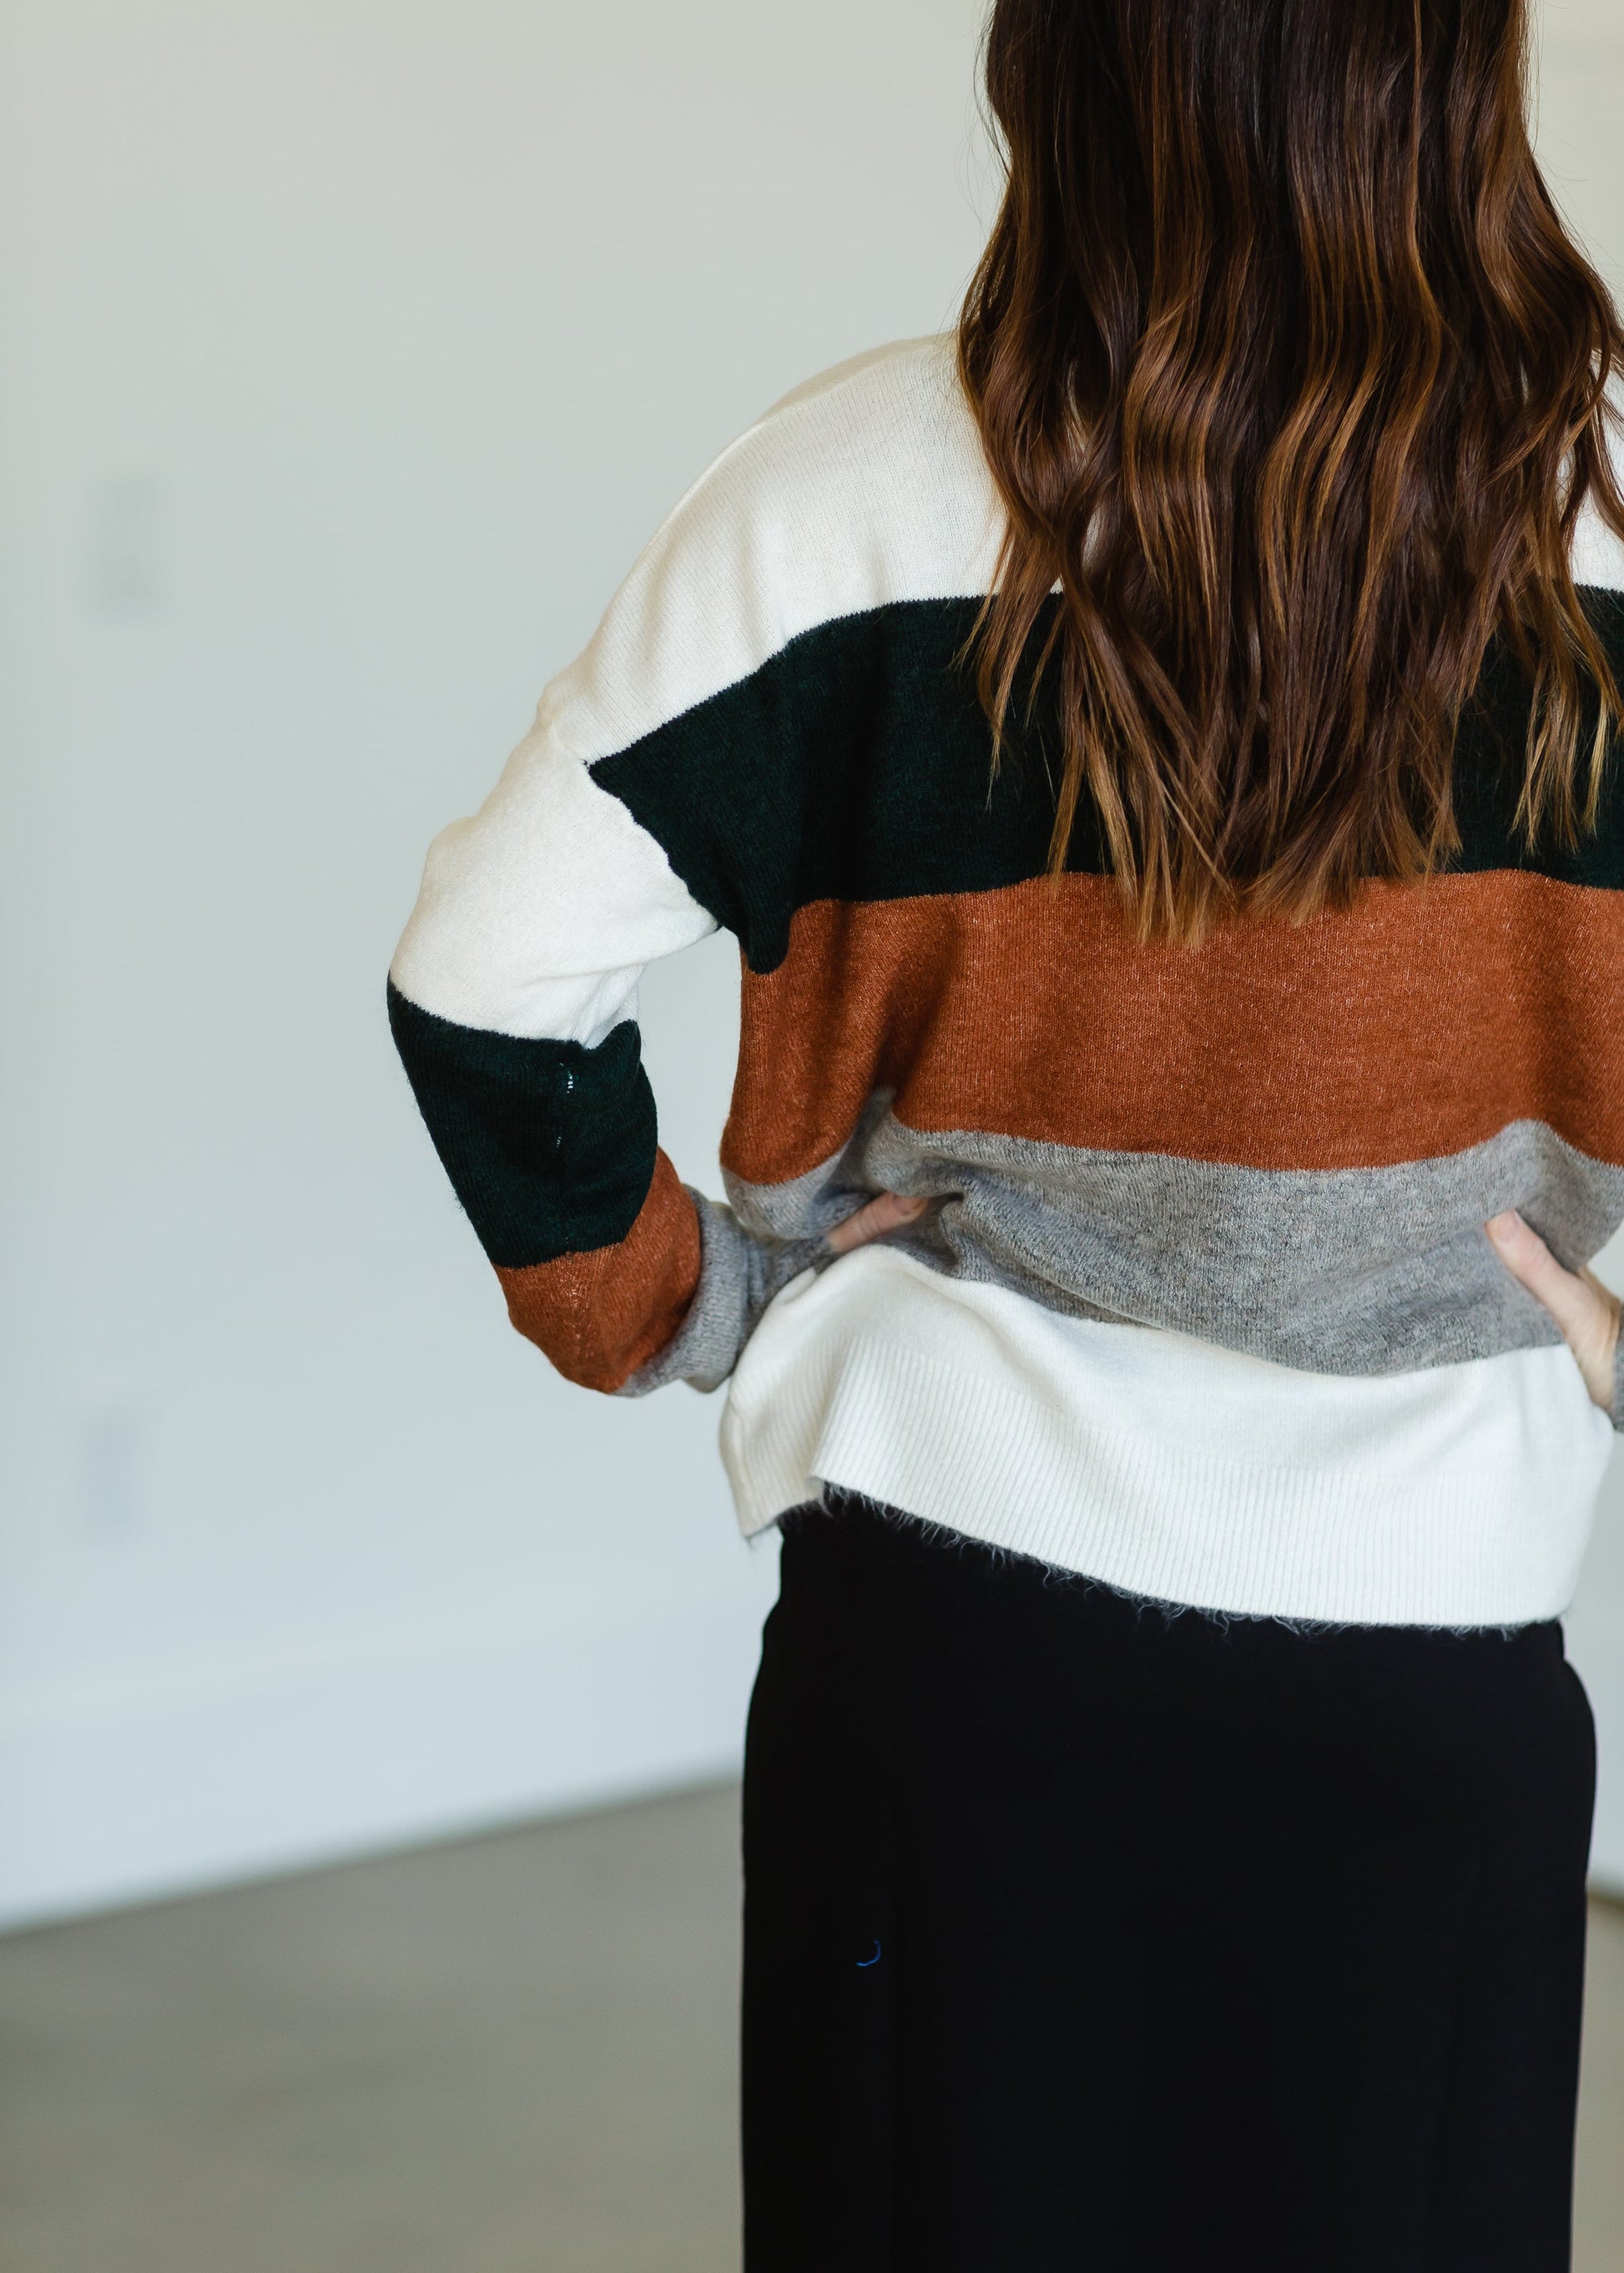 Forest Striped Long Sleeve Sweater - FINAL SALE Tops